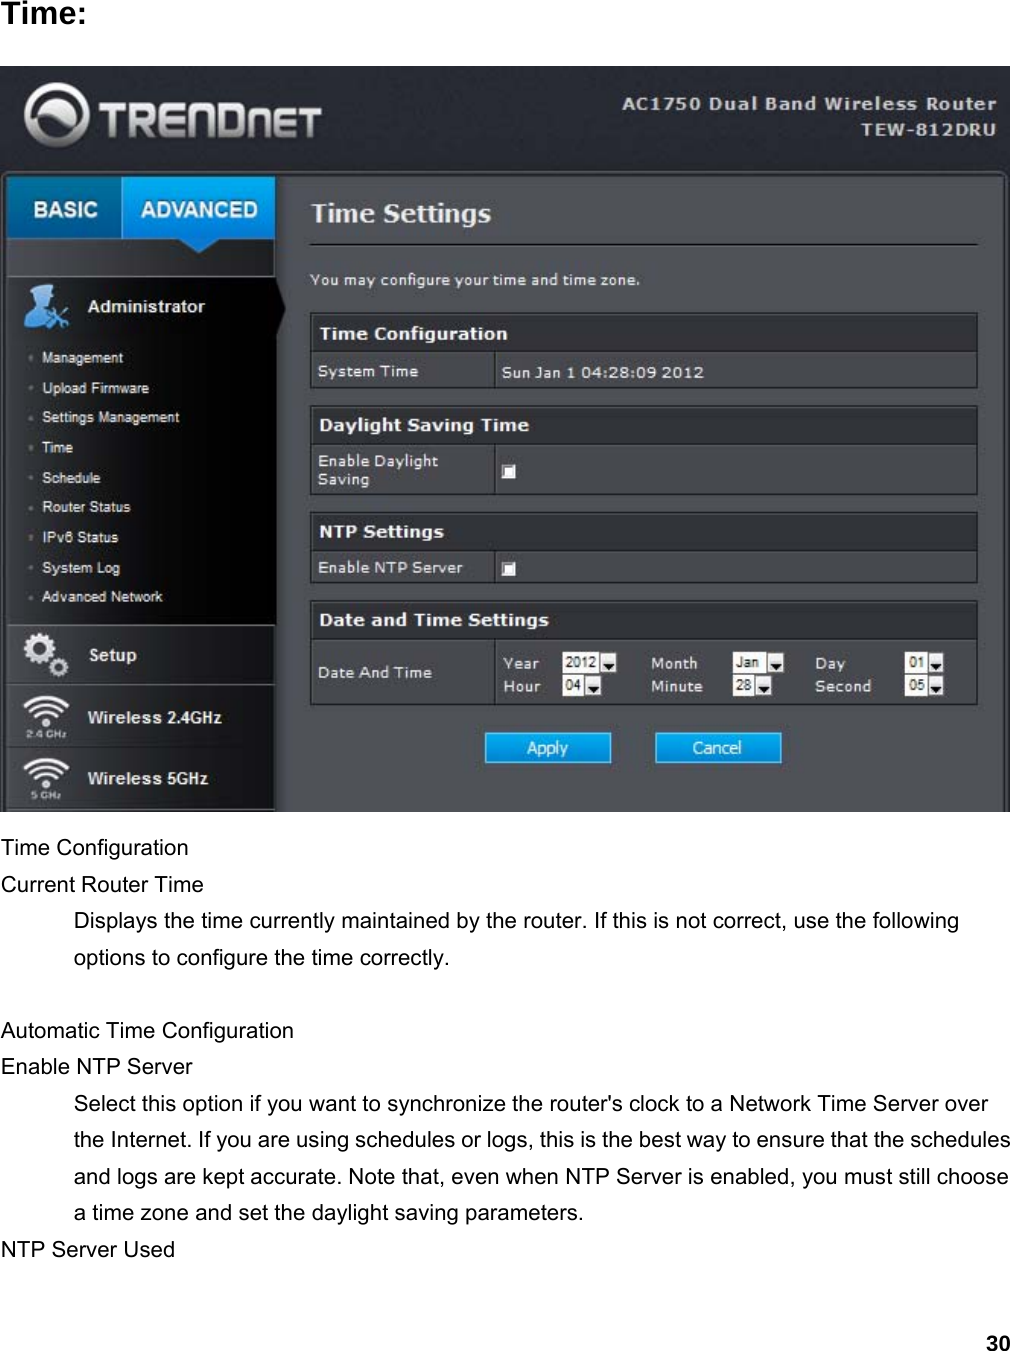 30 Time:  Time Configuration   Current Router Time   Displays the time currently maintained by the router. If this is not correct, use the following options to configure the time correctly.    Automatic Time Configuration   Enable NTP Server   Select this option if you want to synchronize the router&apos;s clock to a Network Time Server over the Internet. If you are using schedules or logs, this is the best way to ensure that the schedules and logs are kept accurate. Note that, even when NTP Server is enabled, you must still choose a time zone and set the daylight saving parameters.   NTP Server Used   